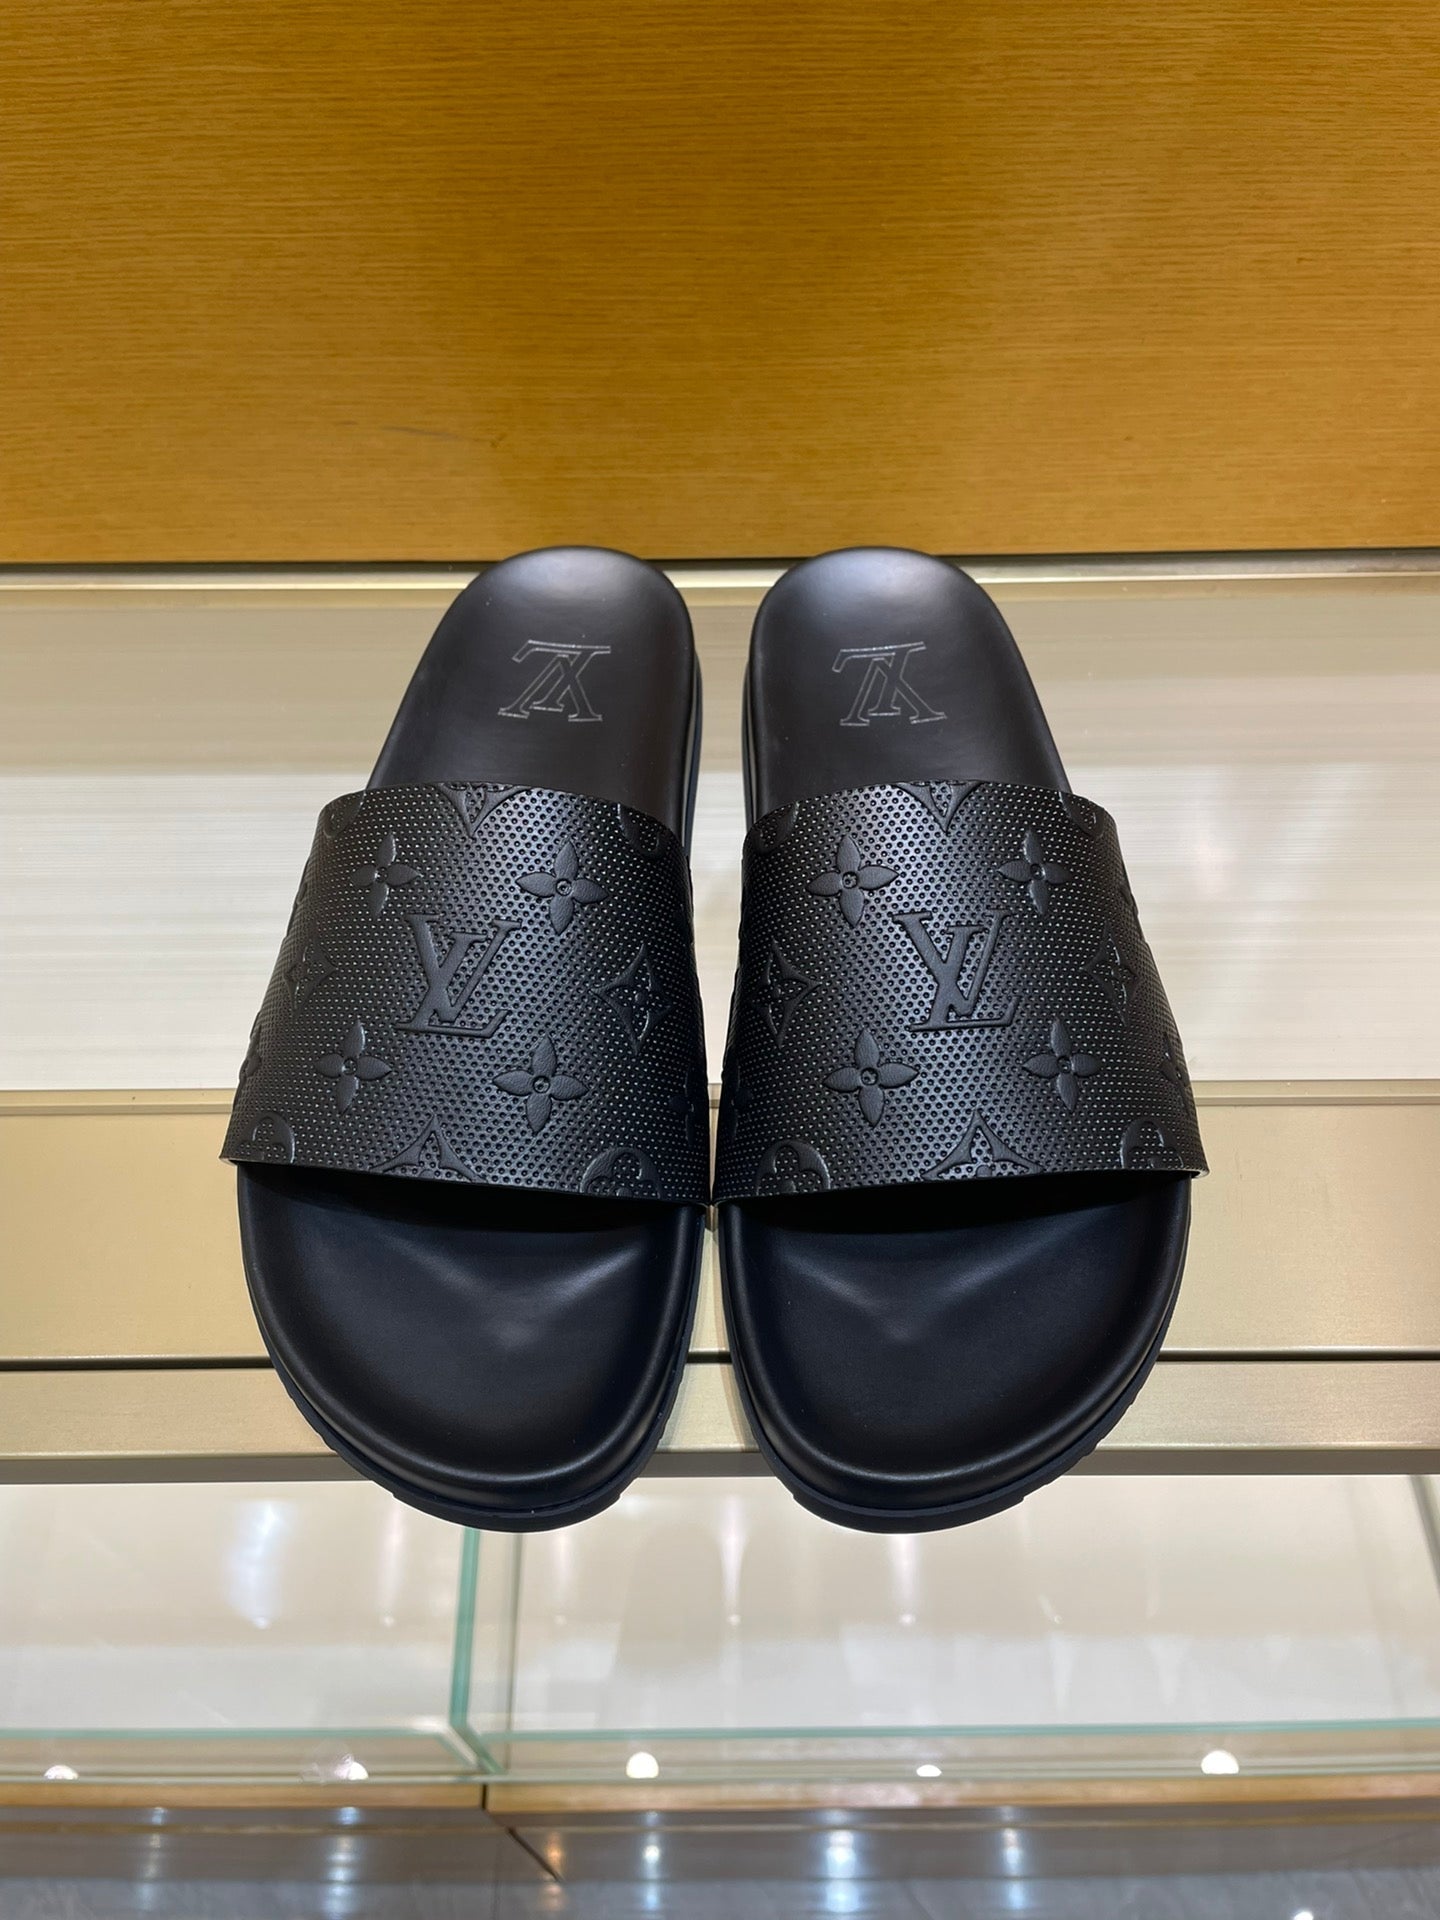 NB - Luxury Slippers Sandals Loafers - LU-V - 319